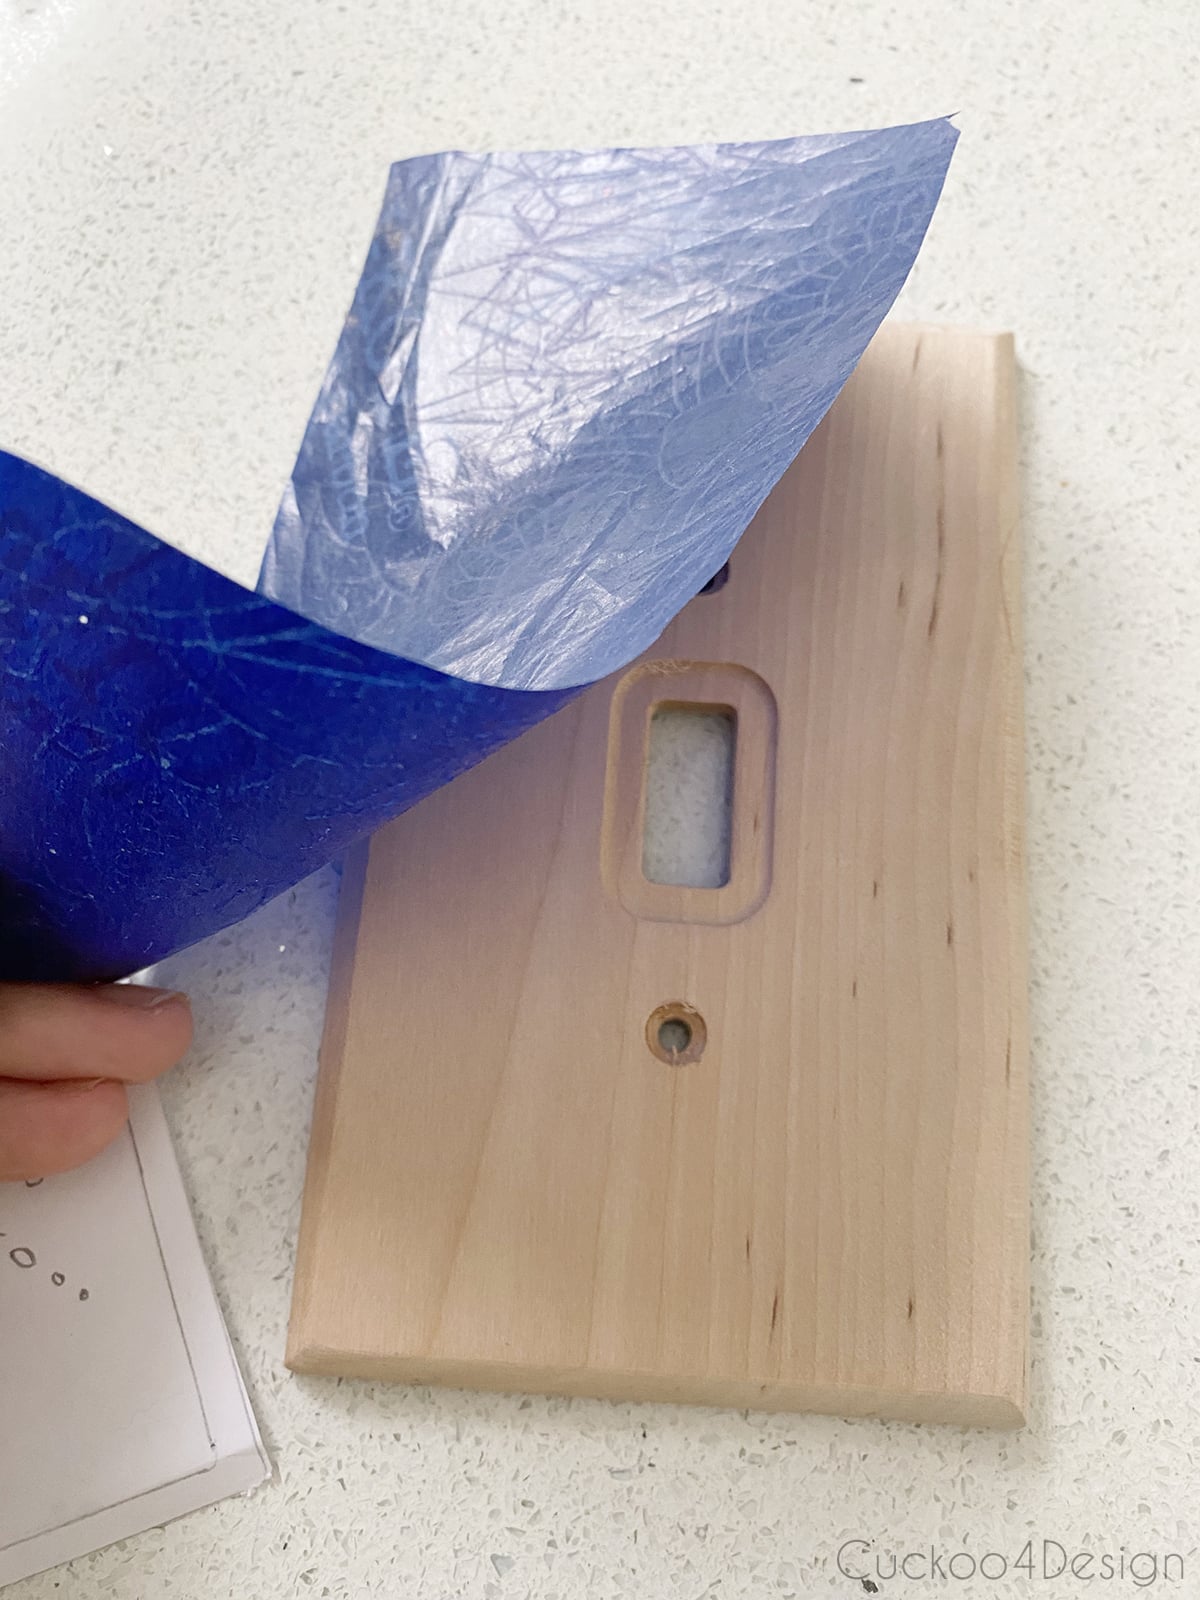 taping carbon transfer paper to the wooden light switch cover